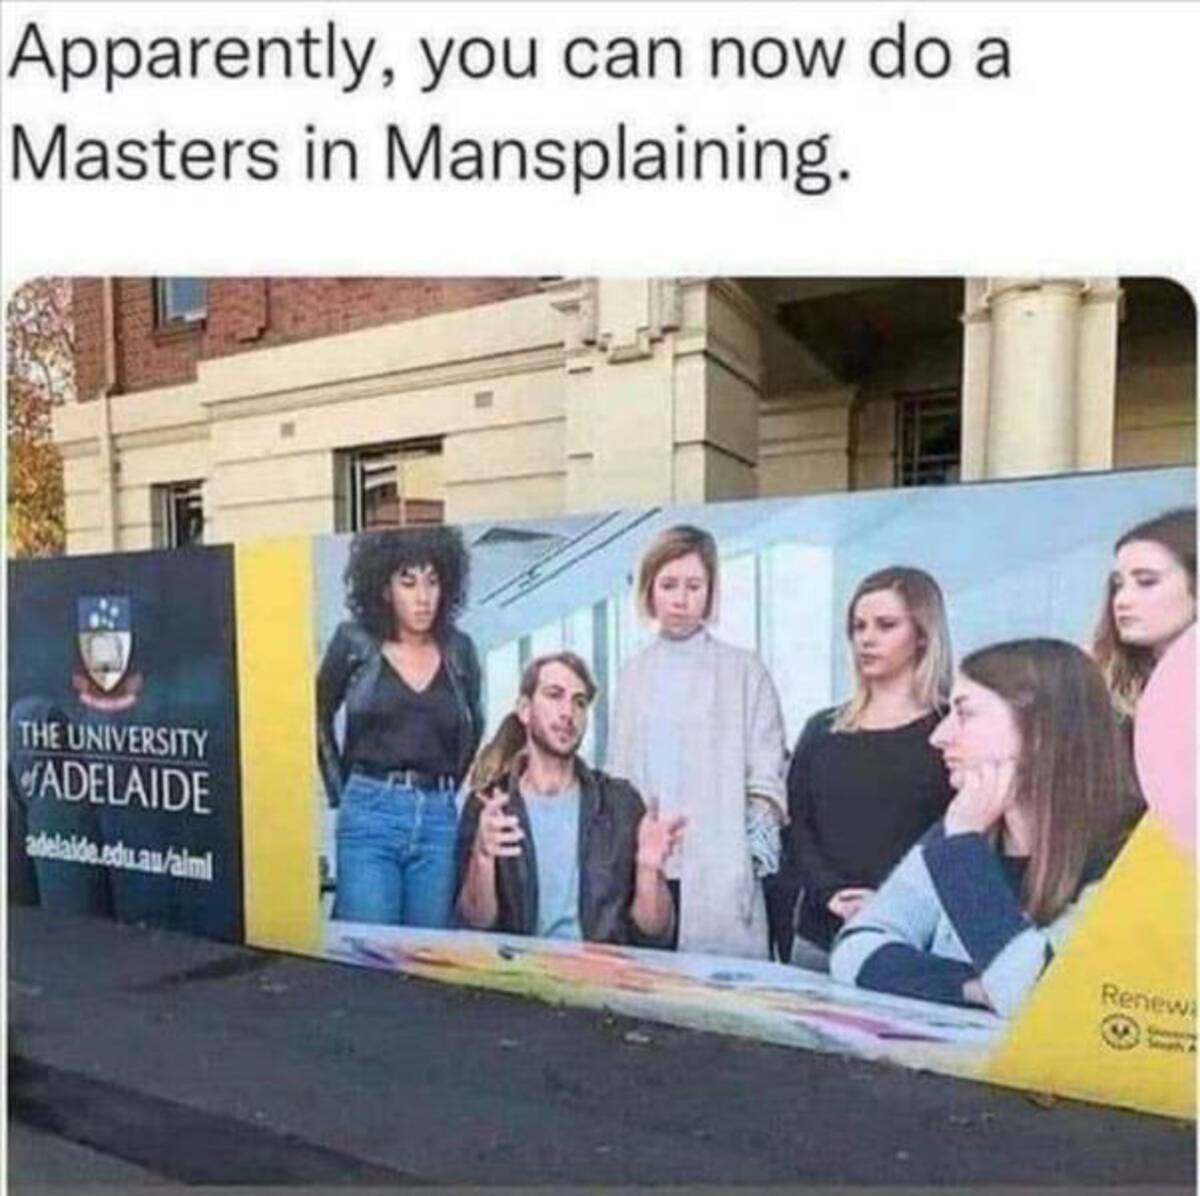 display advertising - Apparently, you can now do a Masters in Mansplaining. The University Adelaide adelaide.edu.aualml Renewa